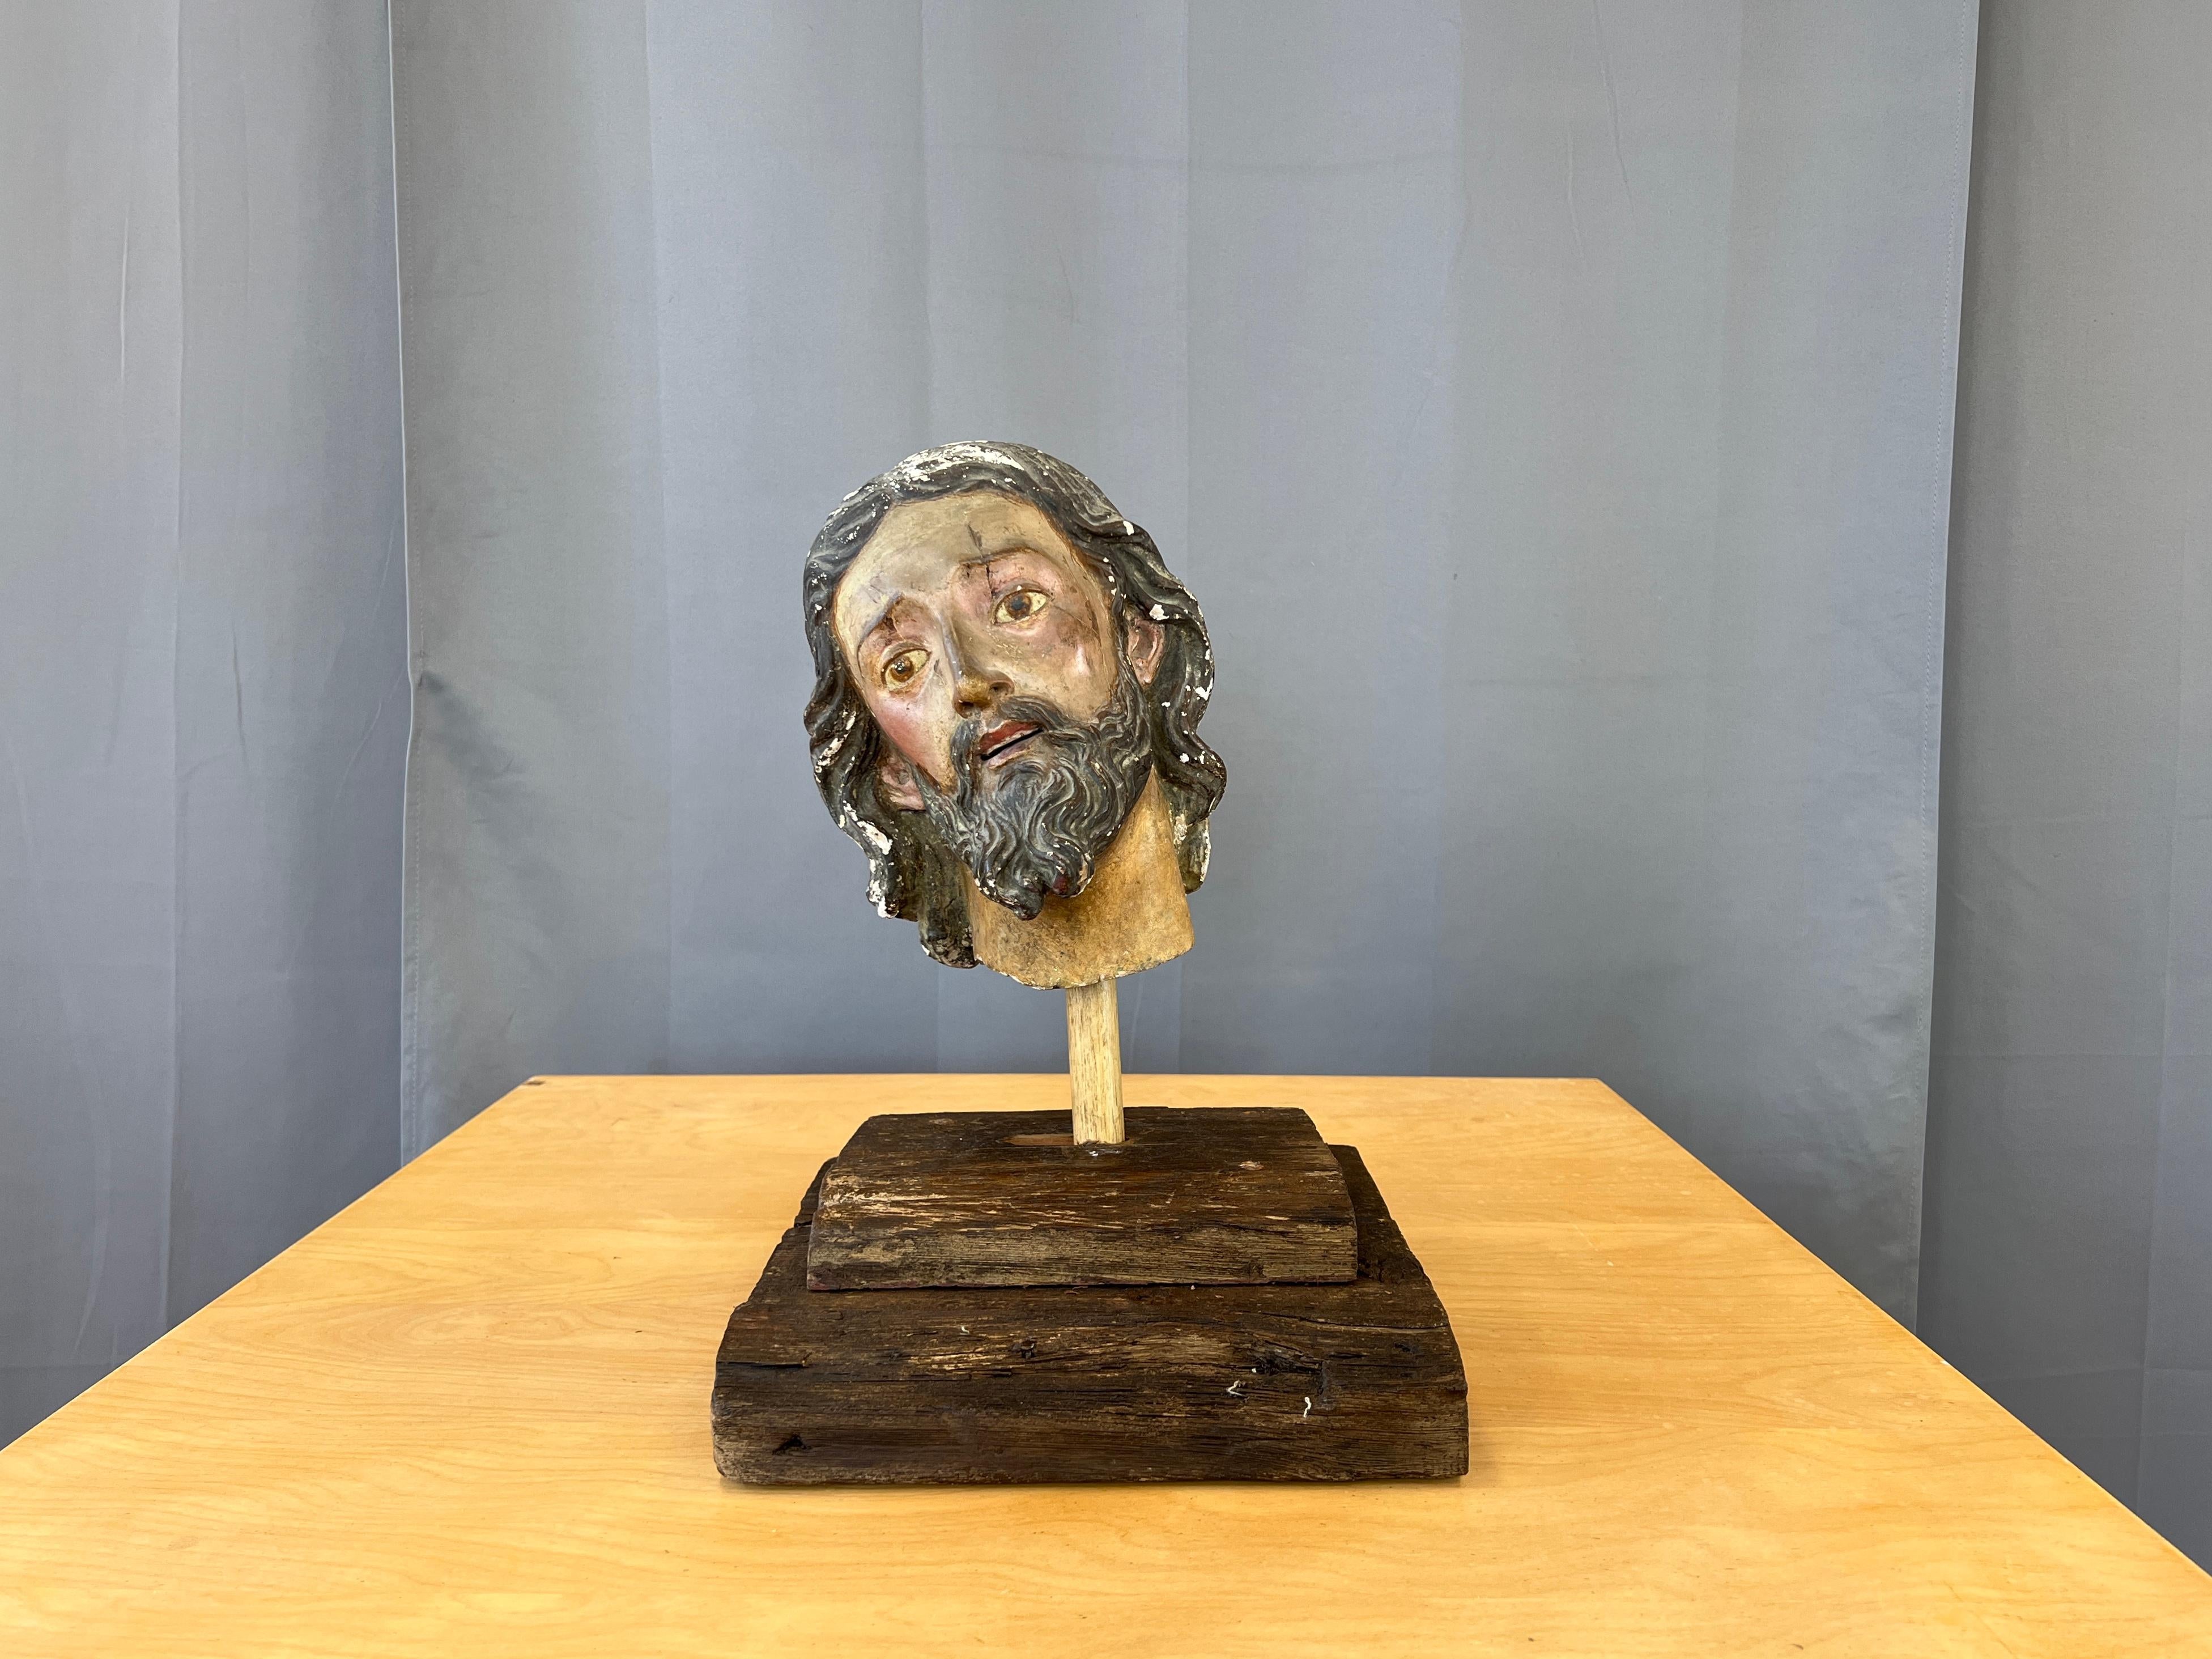 Plaster and Gesso head of a Saint Italian. 
Rustic wooden base, with a wood post which in turns holds the post coming out from under the head.
Head is made of plaster and gesso, black wavy beard and hair, very dark colored skin, with a stare off